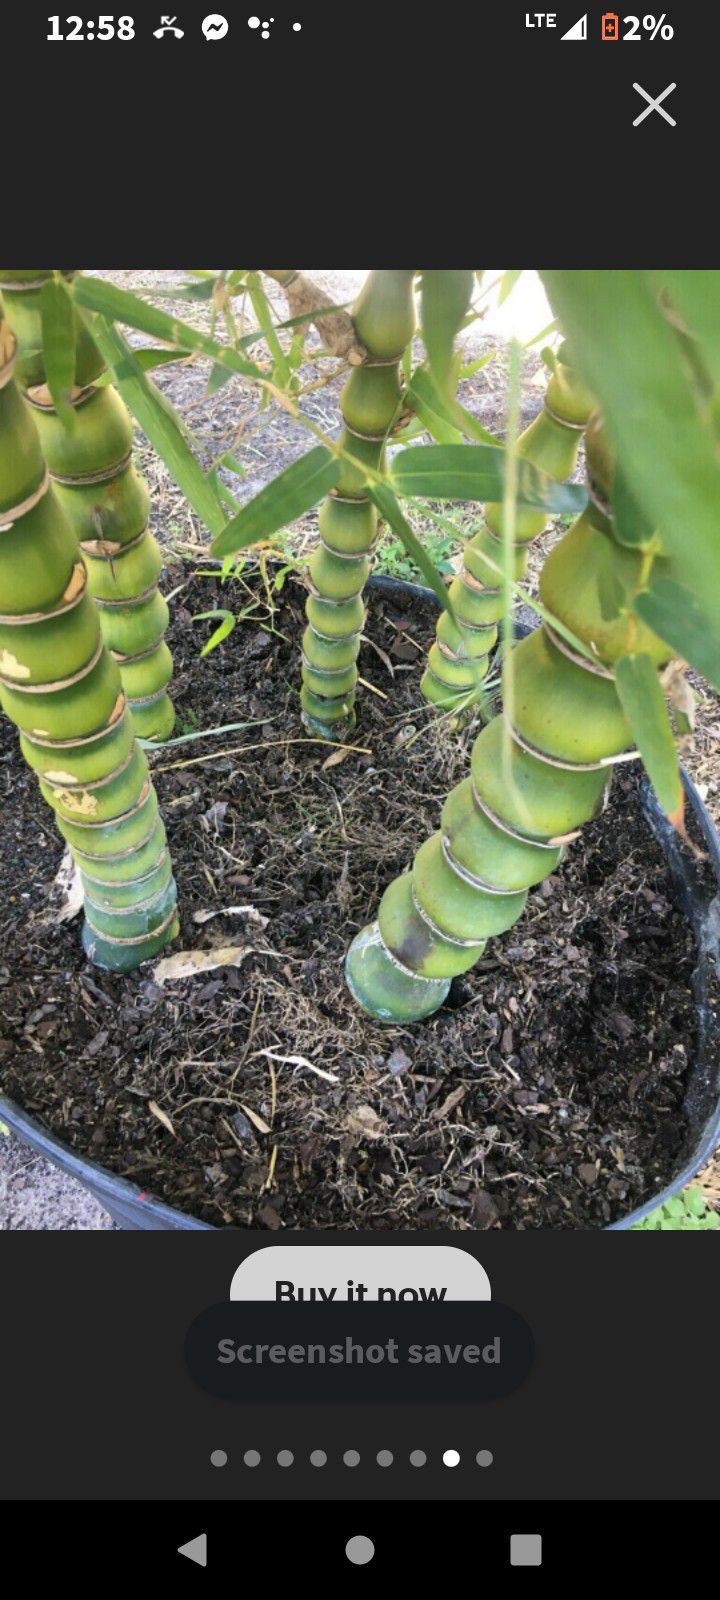 Buddha Bamboo Plants $49.95 For 25 Plants 1ft To 2ft Tall In Height , Great For Privacy Screens 